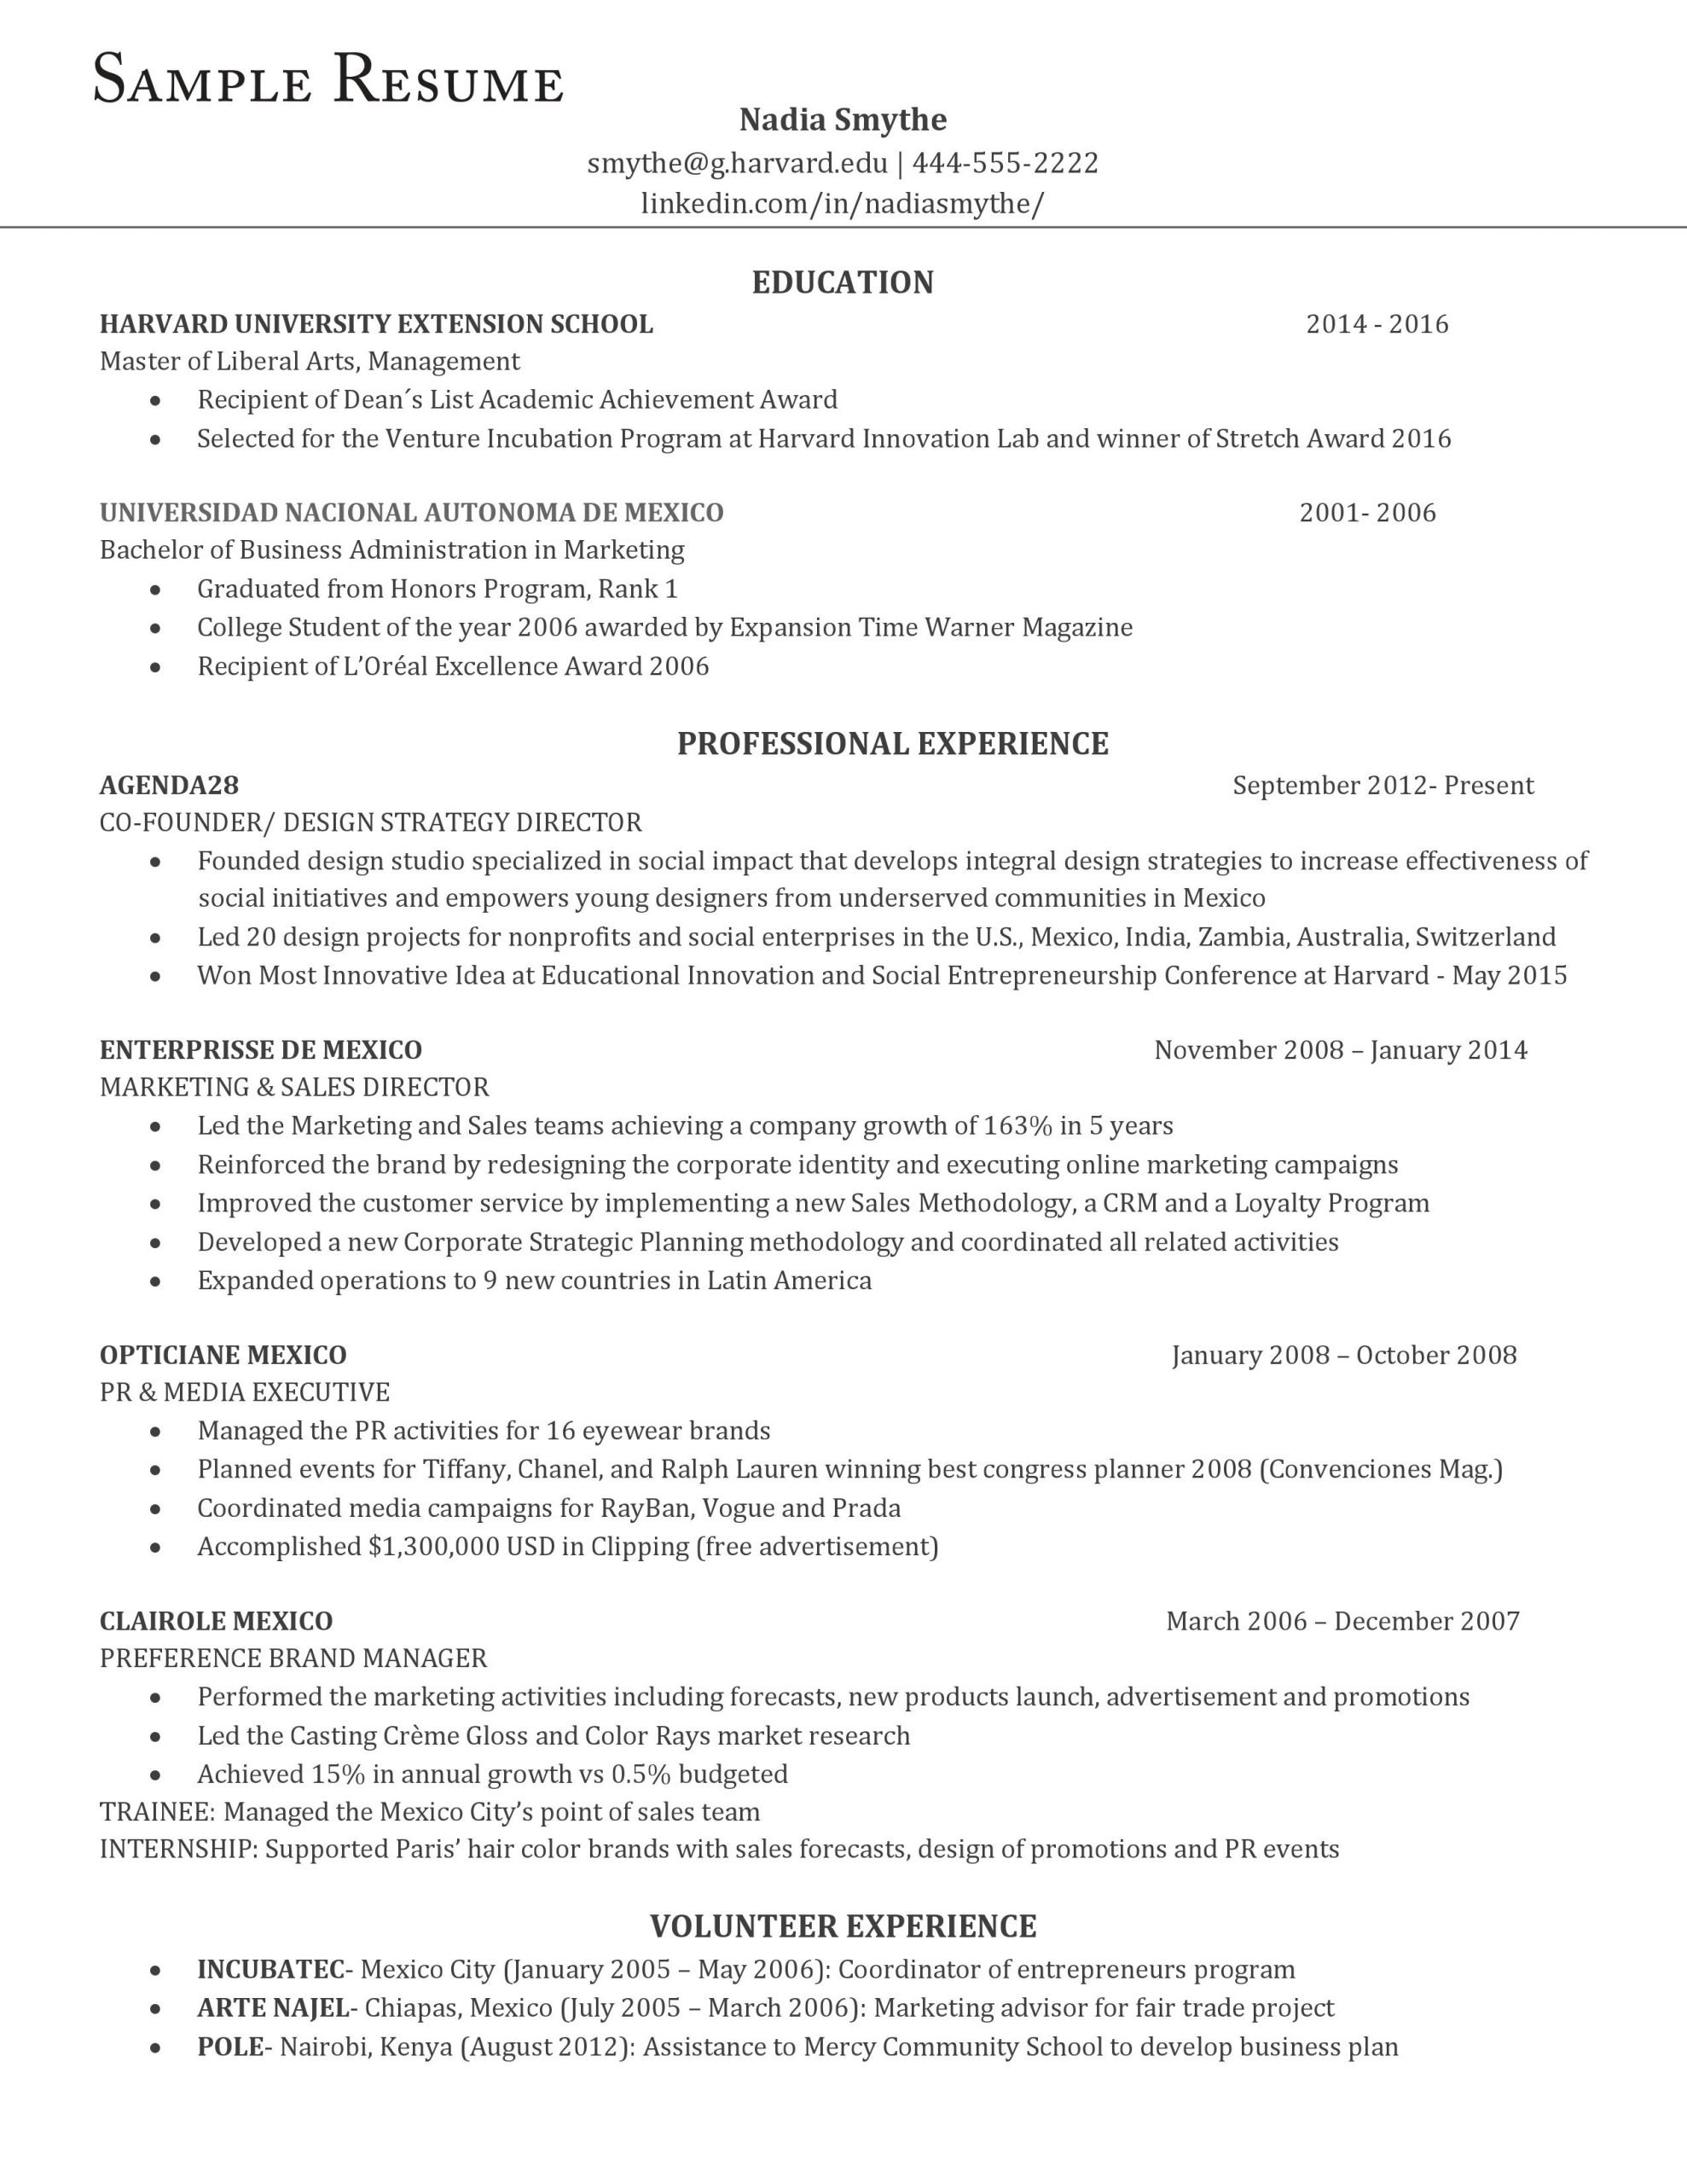 This is what a perfect resume looks like, according to ...